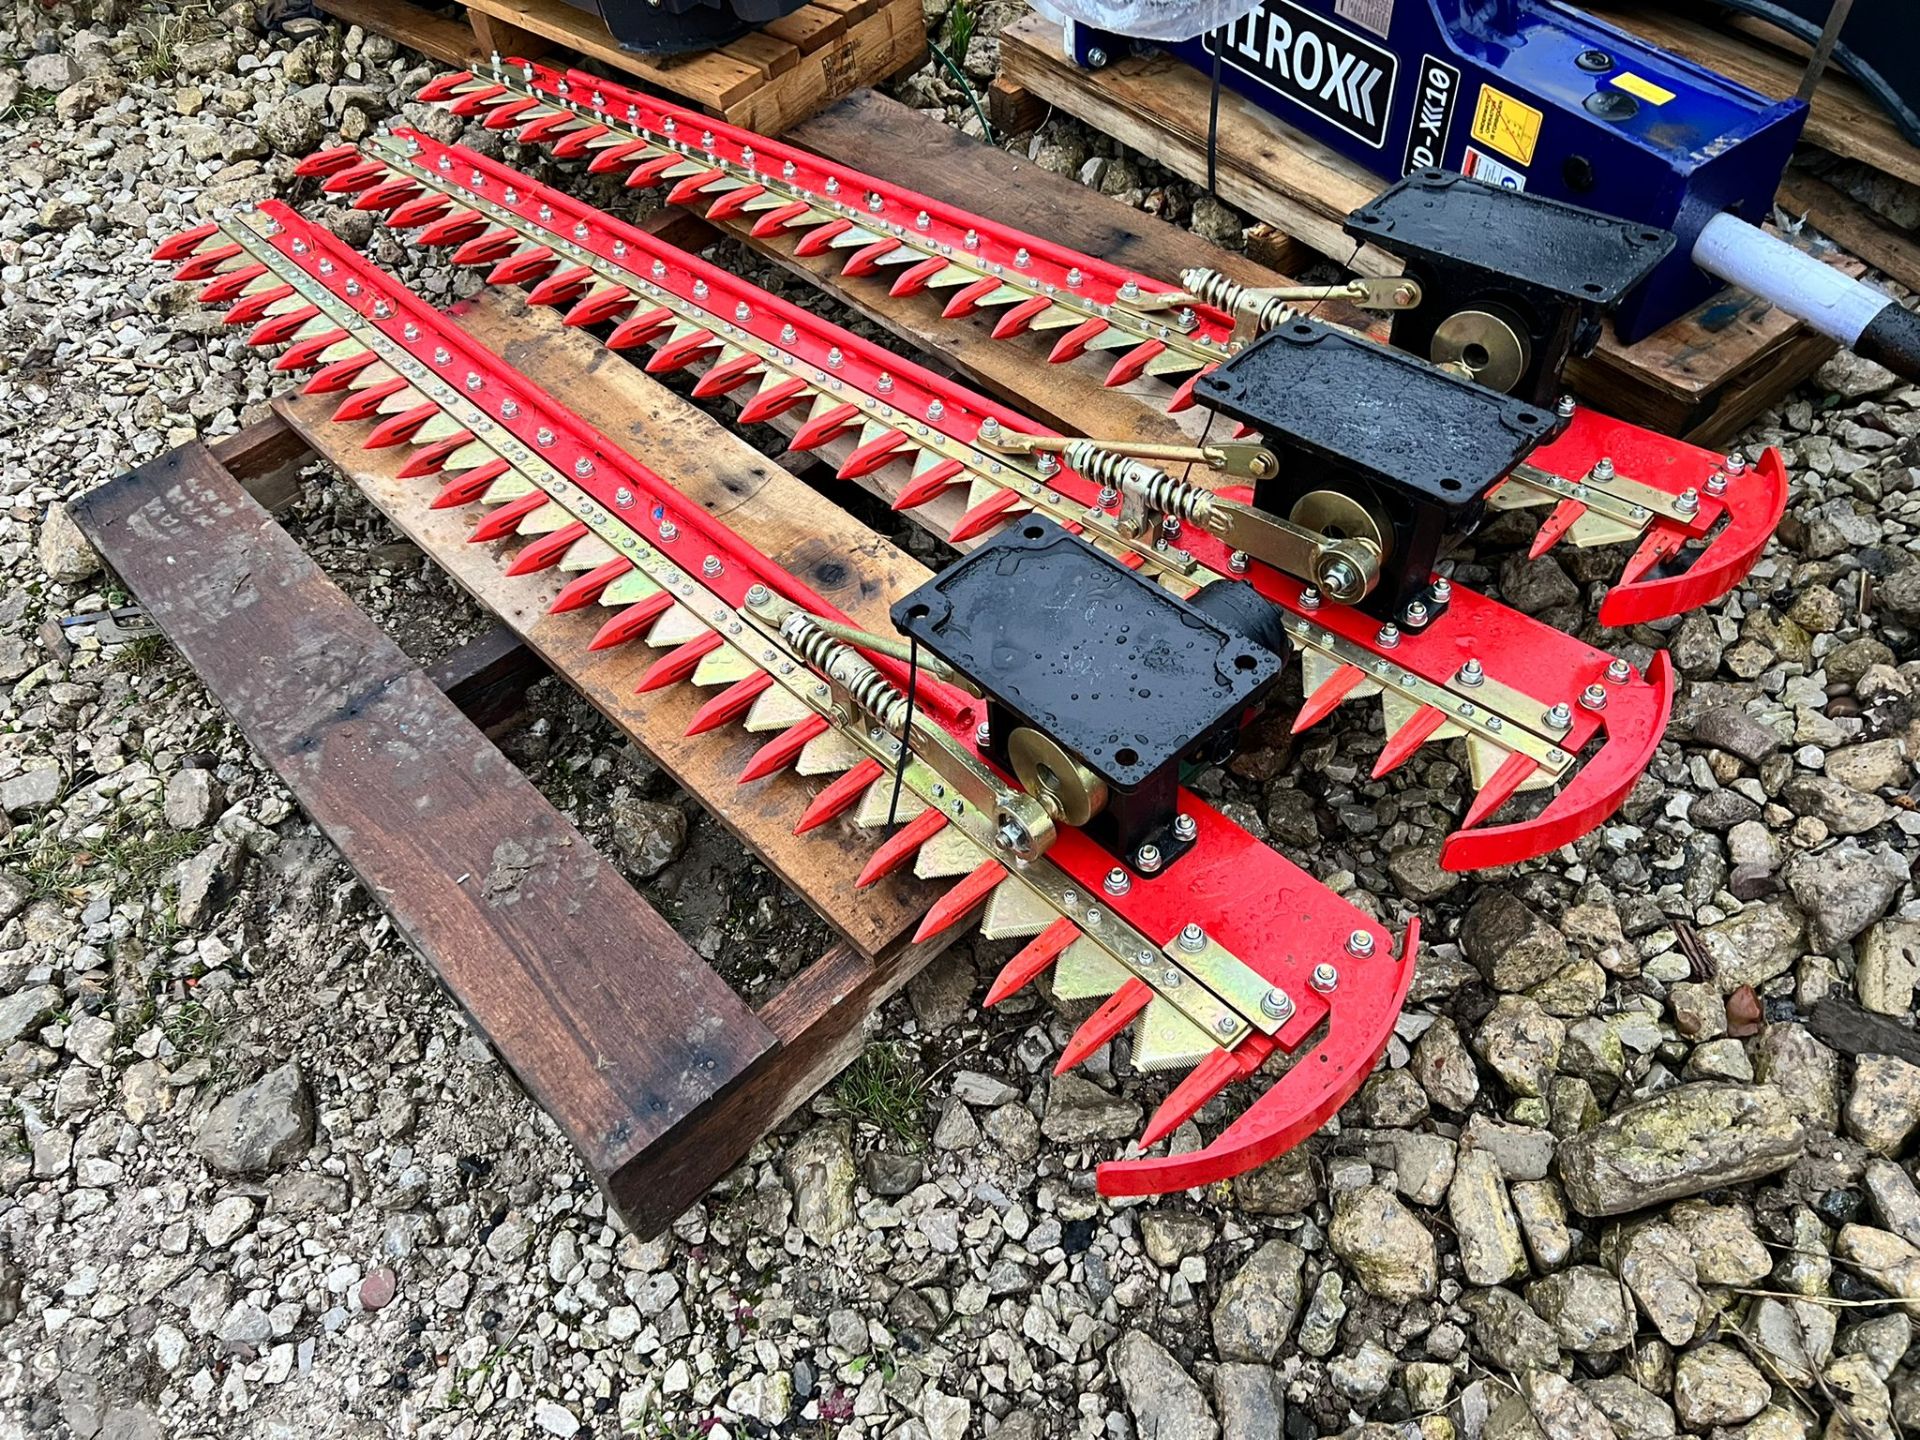 1 x NEW AND UNUSED 1.8 METRE KUBOTA ORANGE HEDGE CUTTER / TRIMMERS, SUITABLE FOR 1-3 TON DIGGER - Image 2 of 7